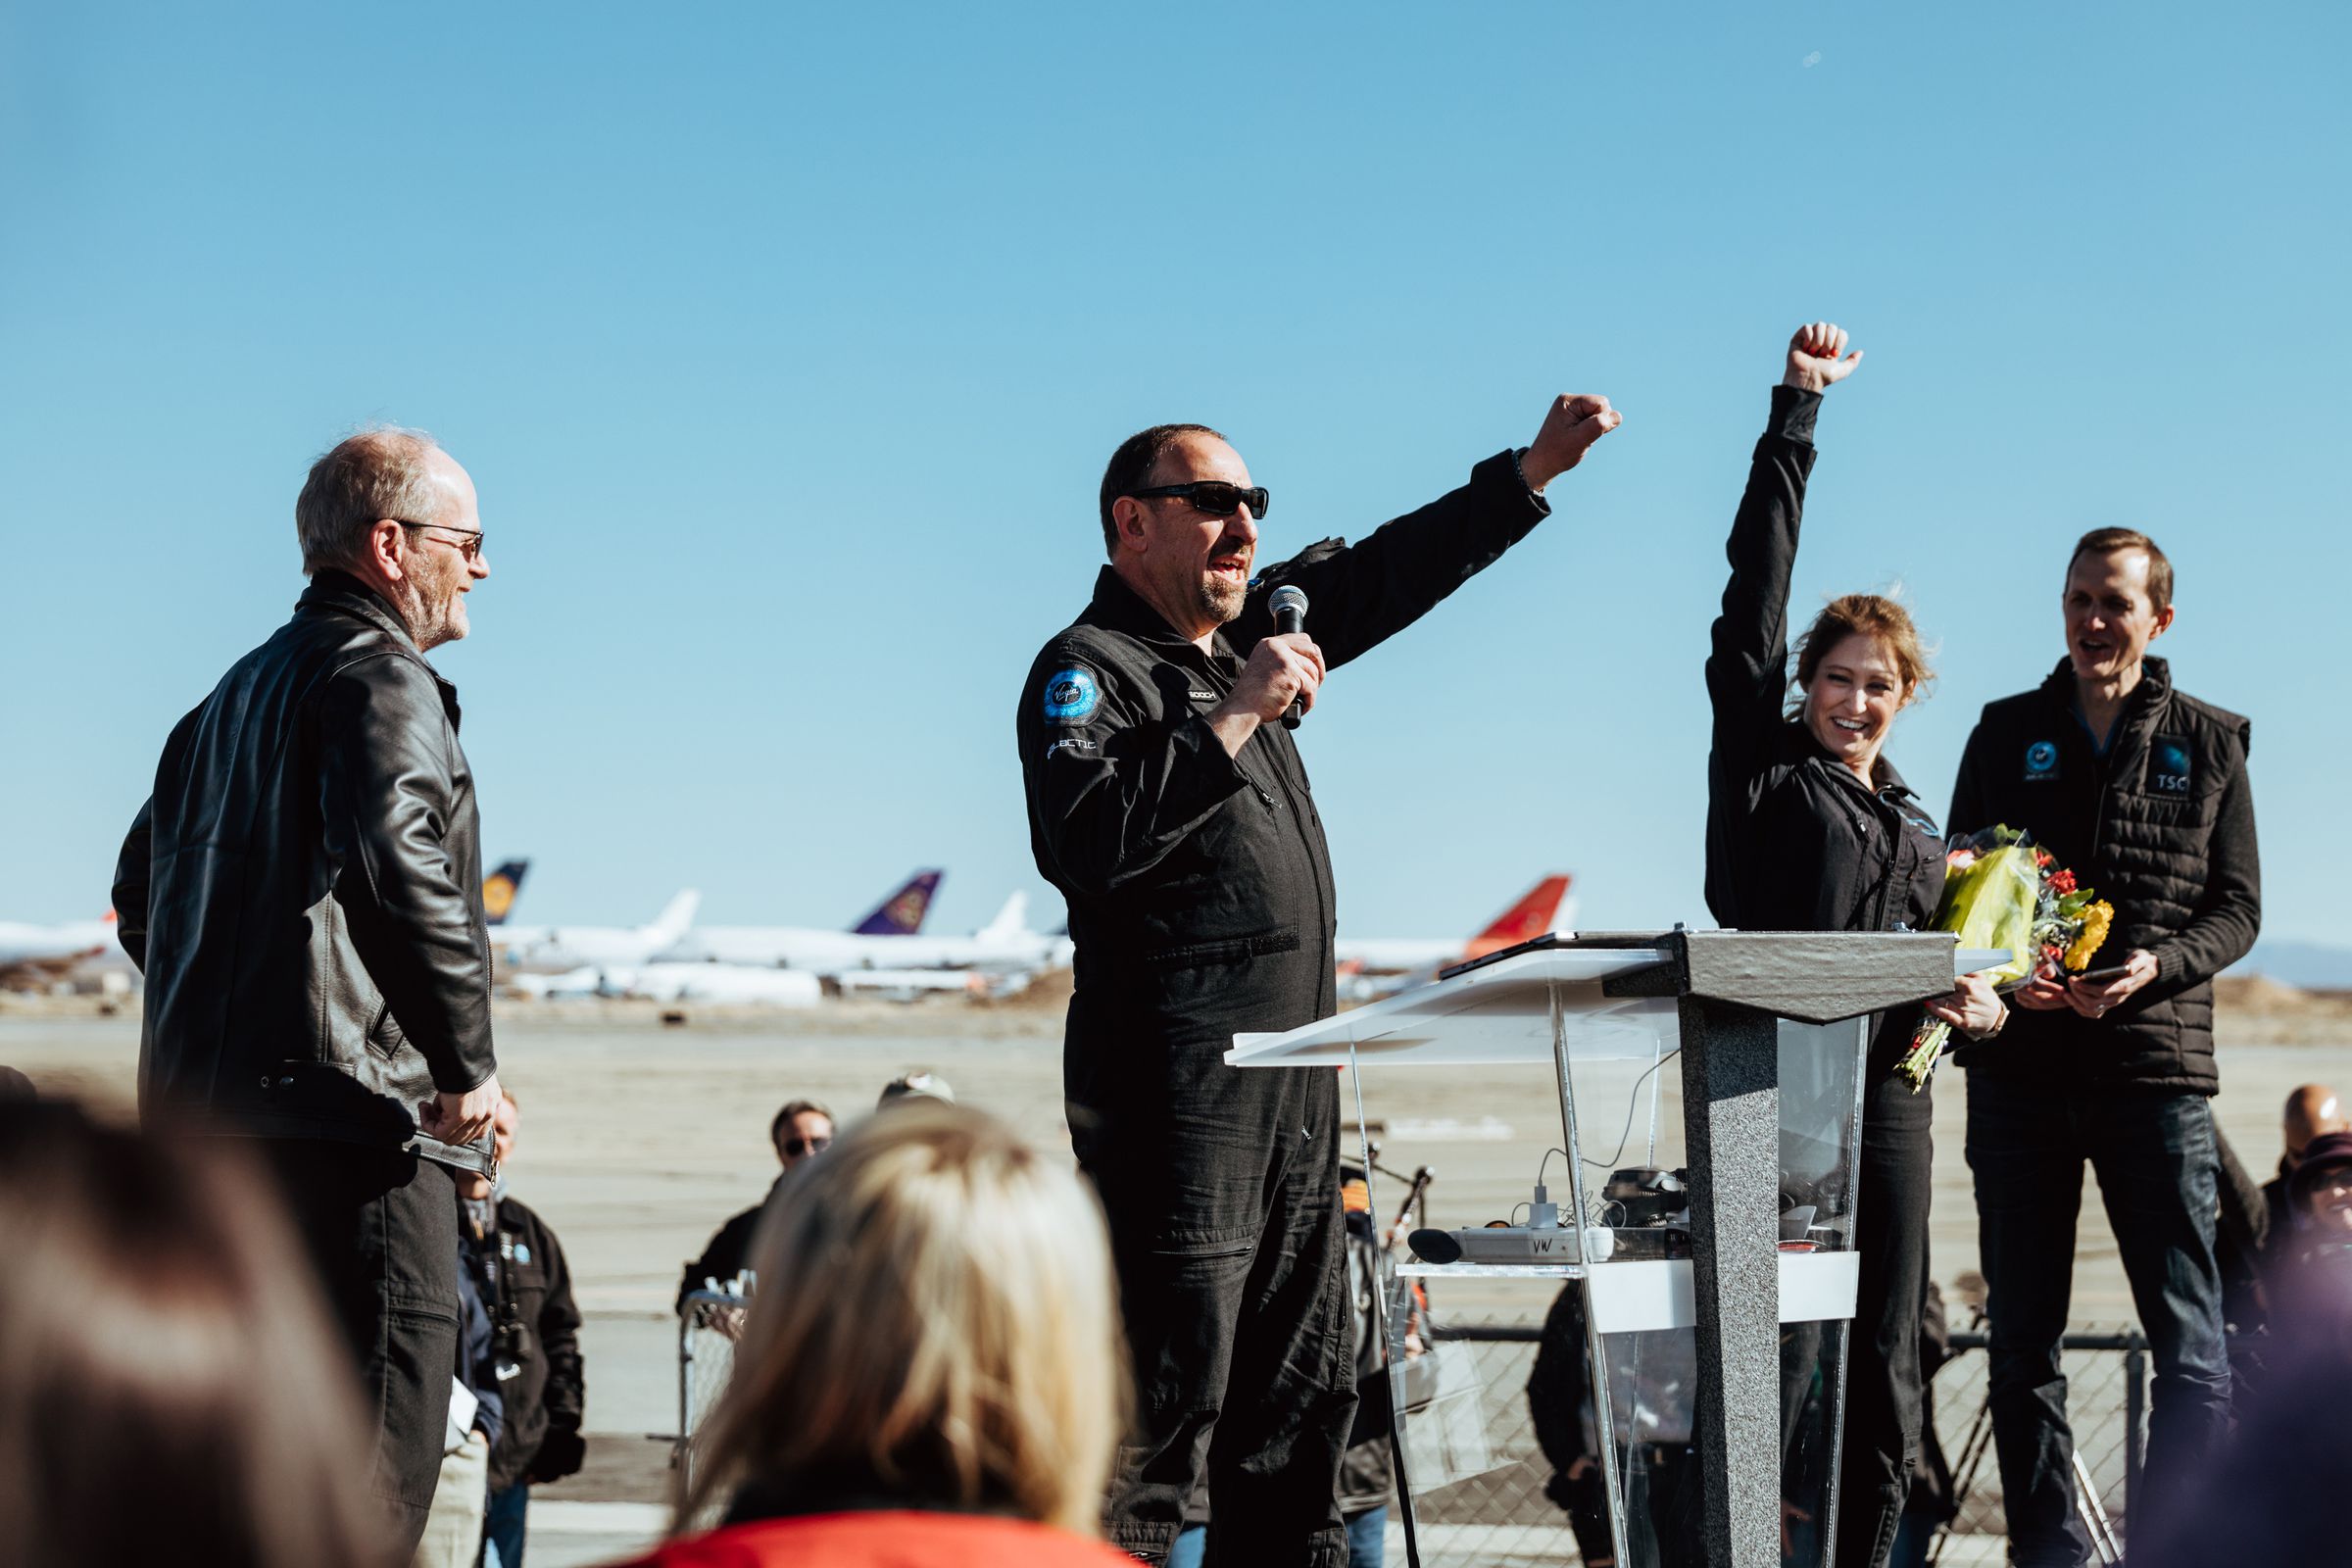 Beth Moses celebrating after the flight with the two pilots, Dave Mackay (L) and Mike ‘Sooch’ Masucci (C), as well as Virgin Galactic CEO George Whitesides (R)